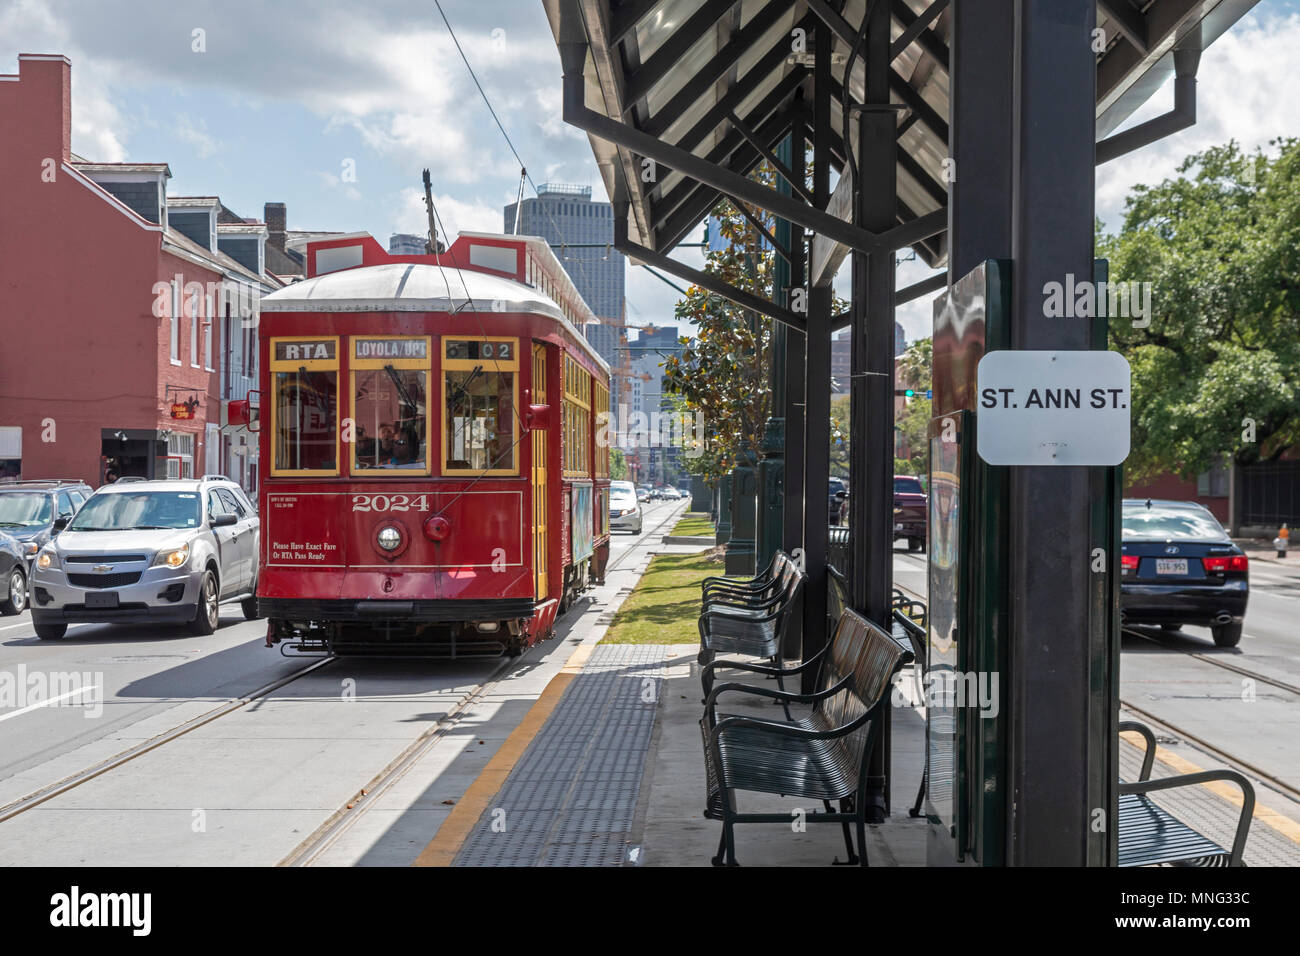 New Orleans, Louisiana - A New Orleans streetcar on North Rampart Street. Stock Photo